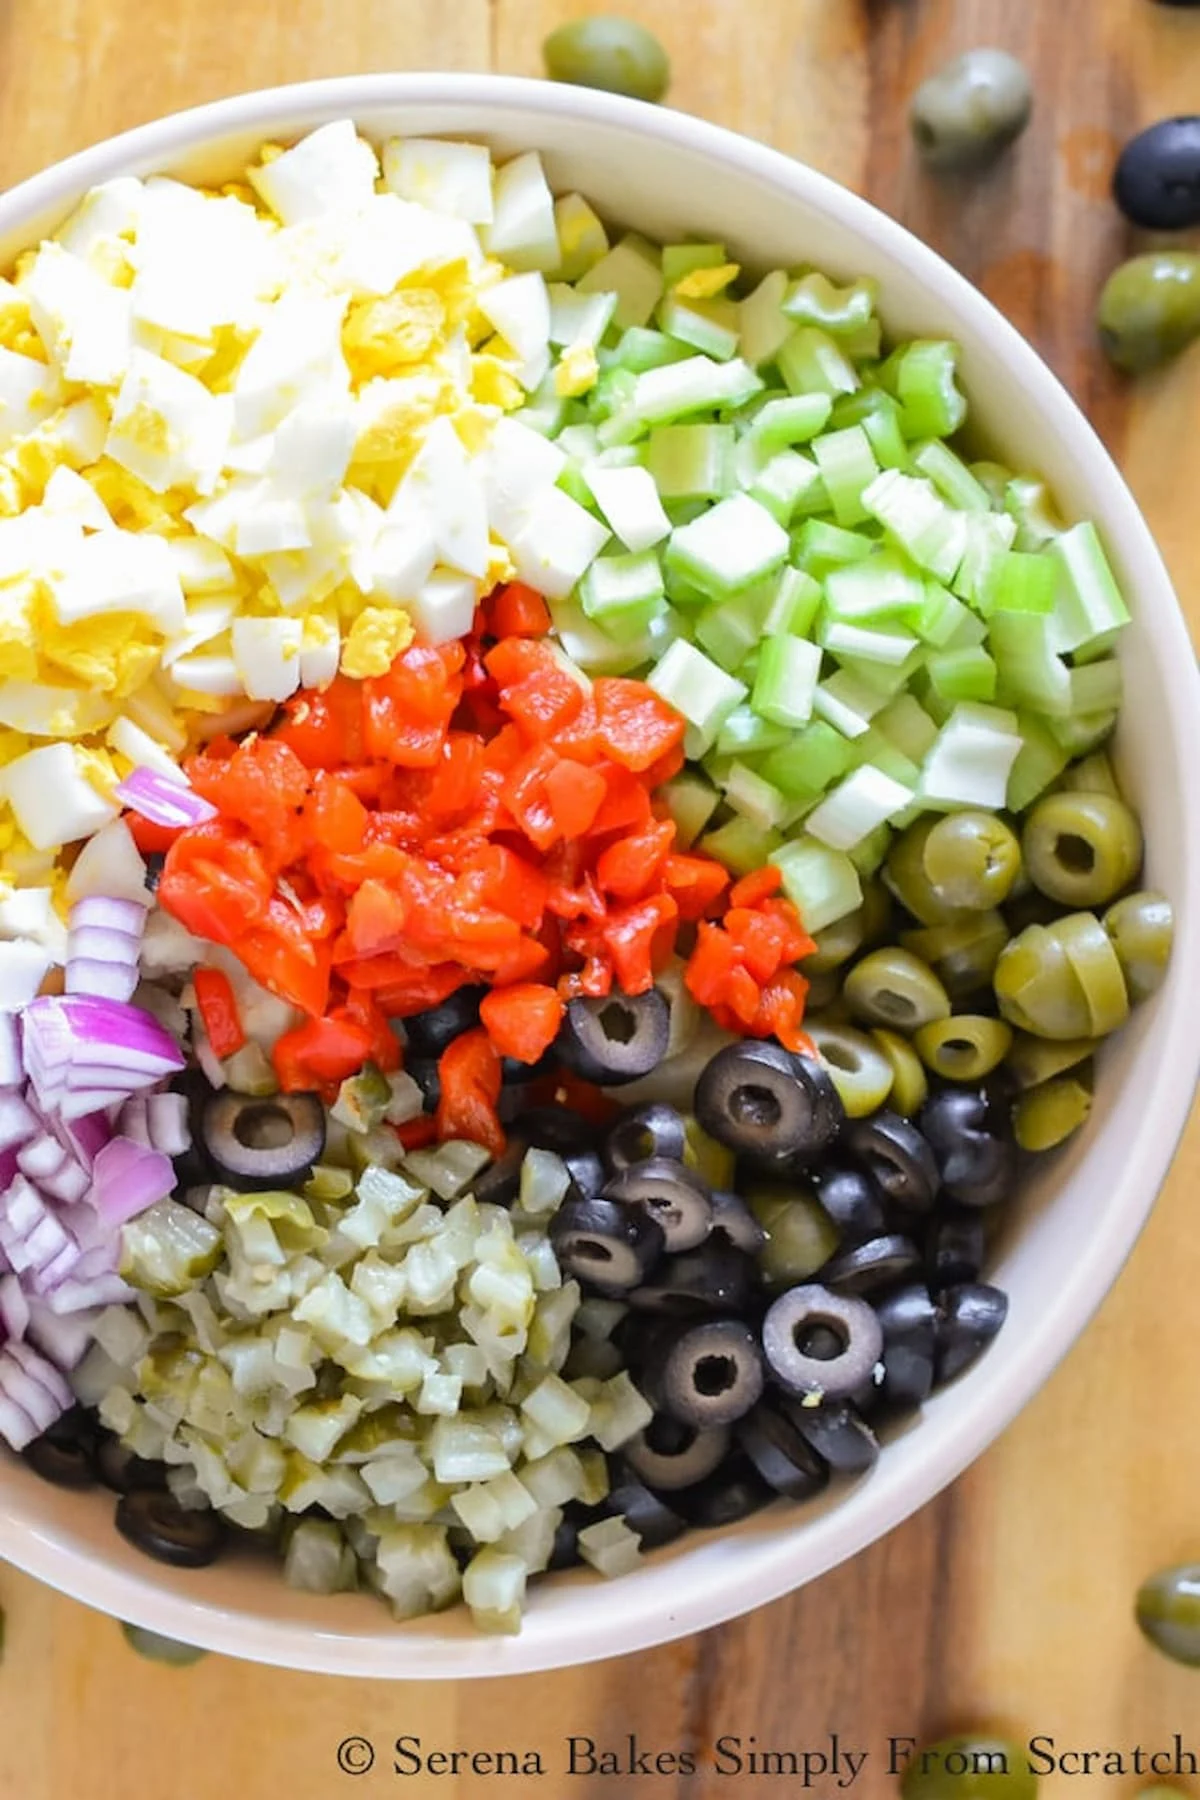 A large bowl filled with diced potato, sliced black olives, sliced green olives, diced egg, diced celery, diced onion, diced roasted red pepper, and diced spicy dill pickles.